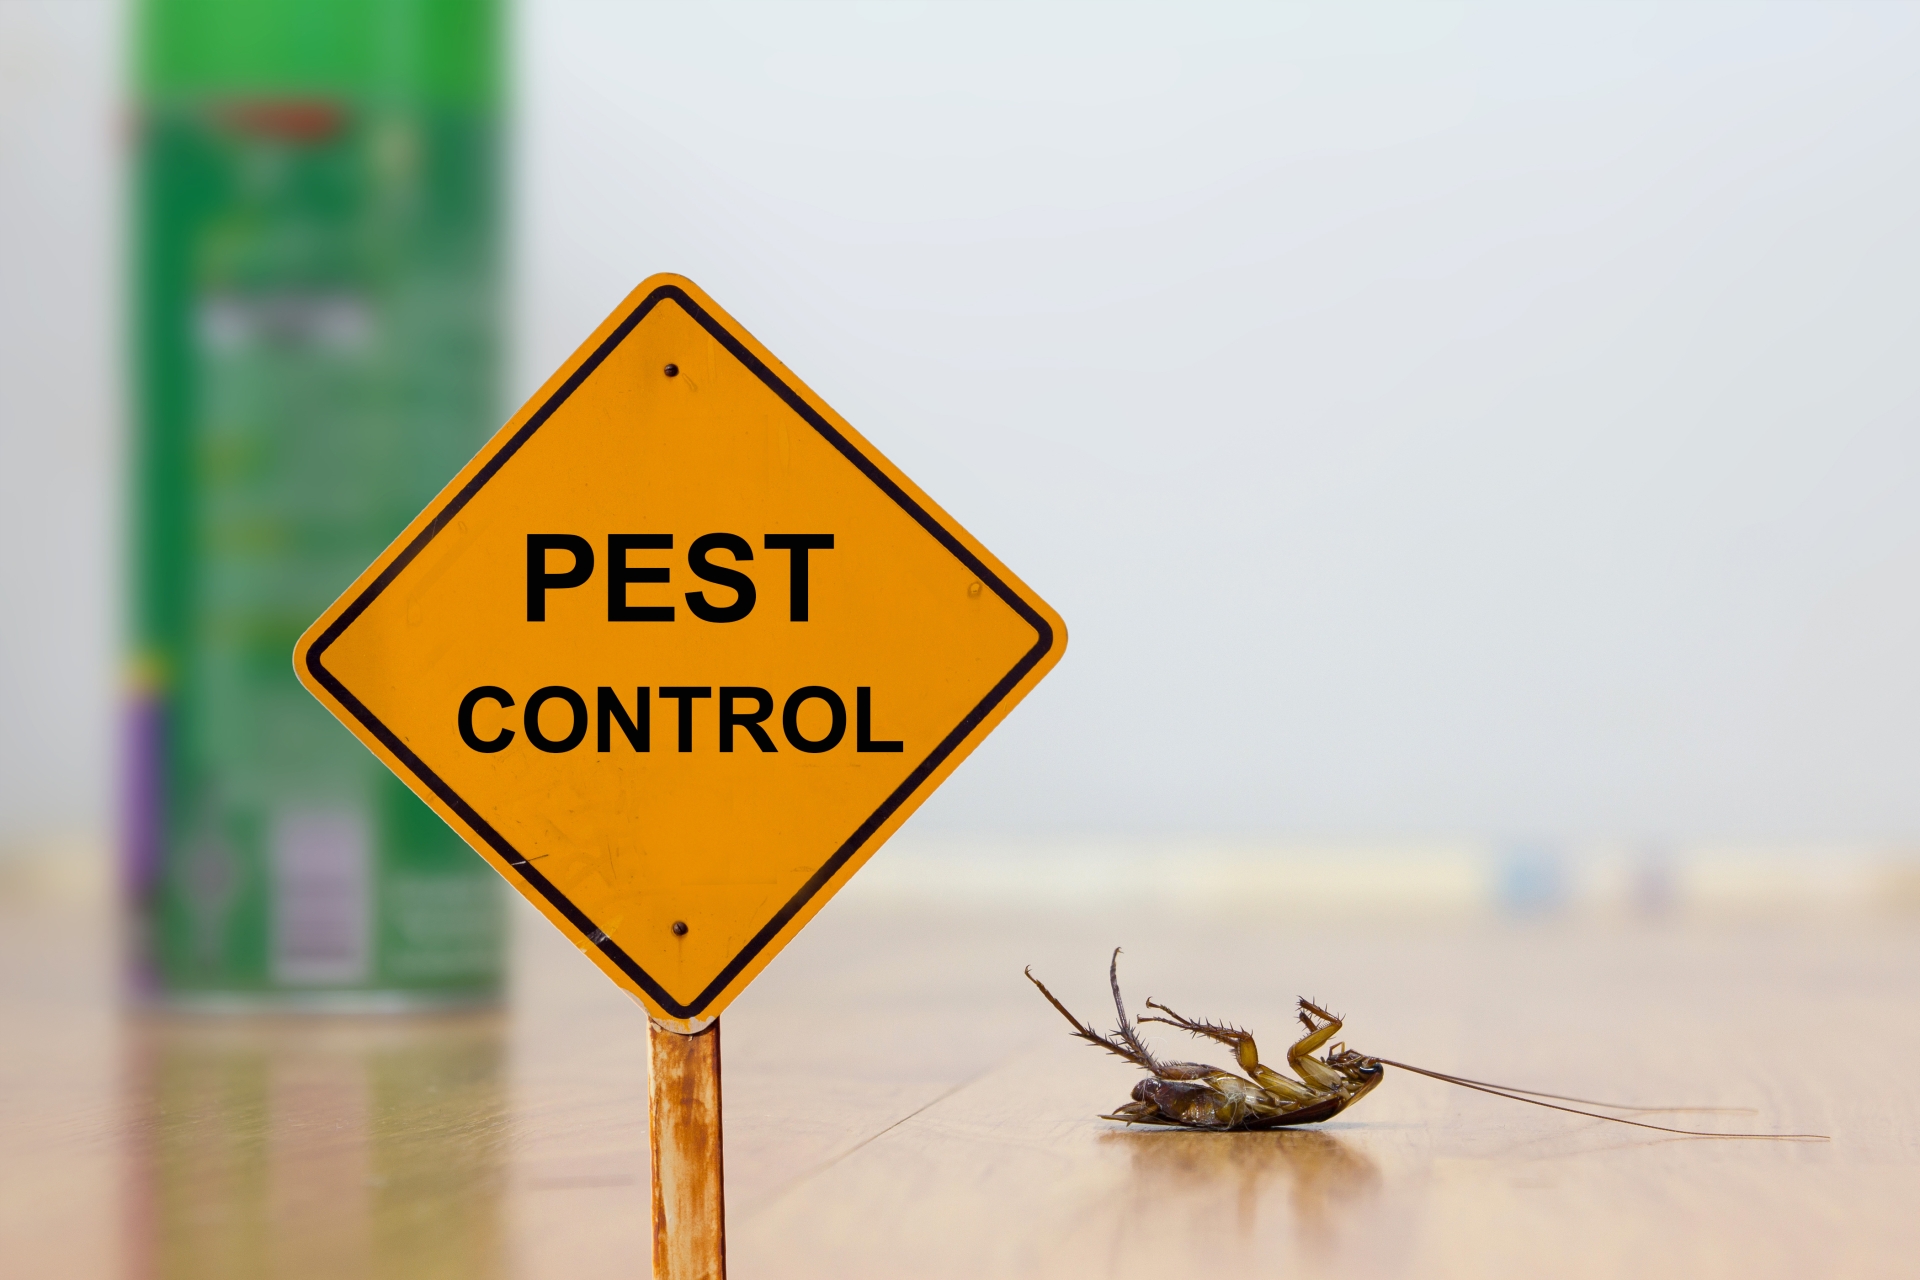 24 Hour Pest Control, Pest Control in Kew, North Sheen, TW9. Call Now 020 8166 9746